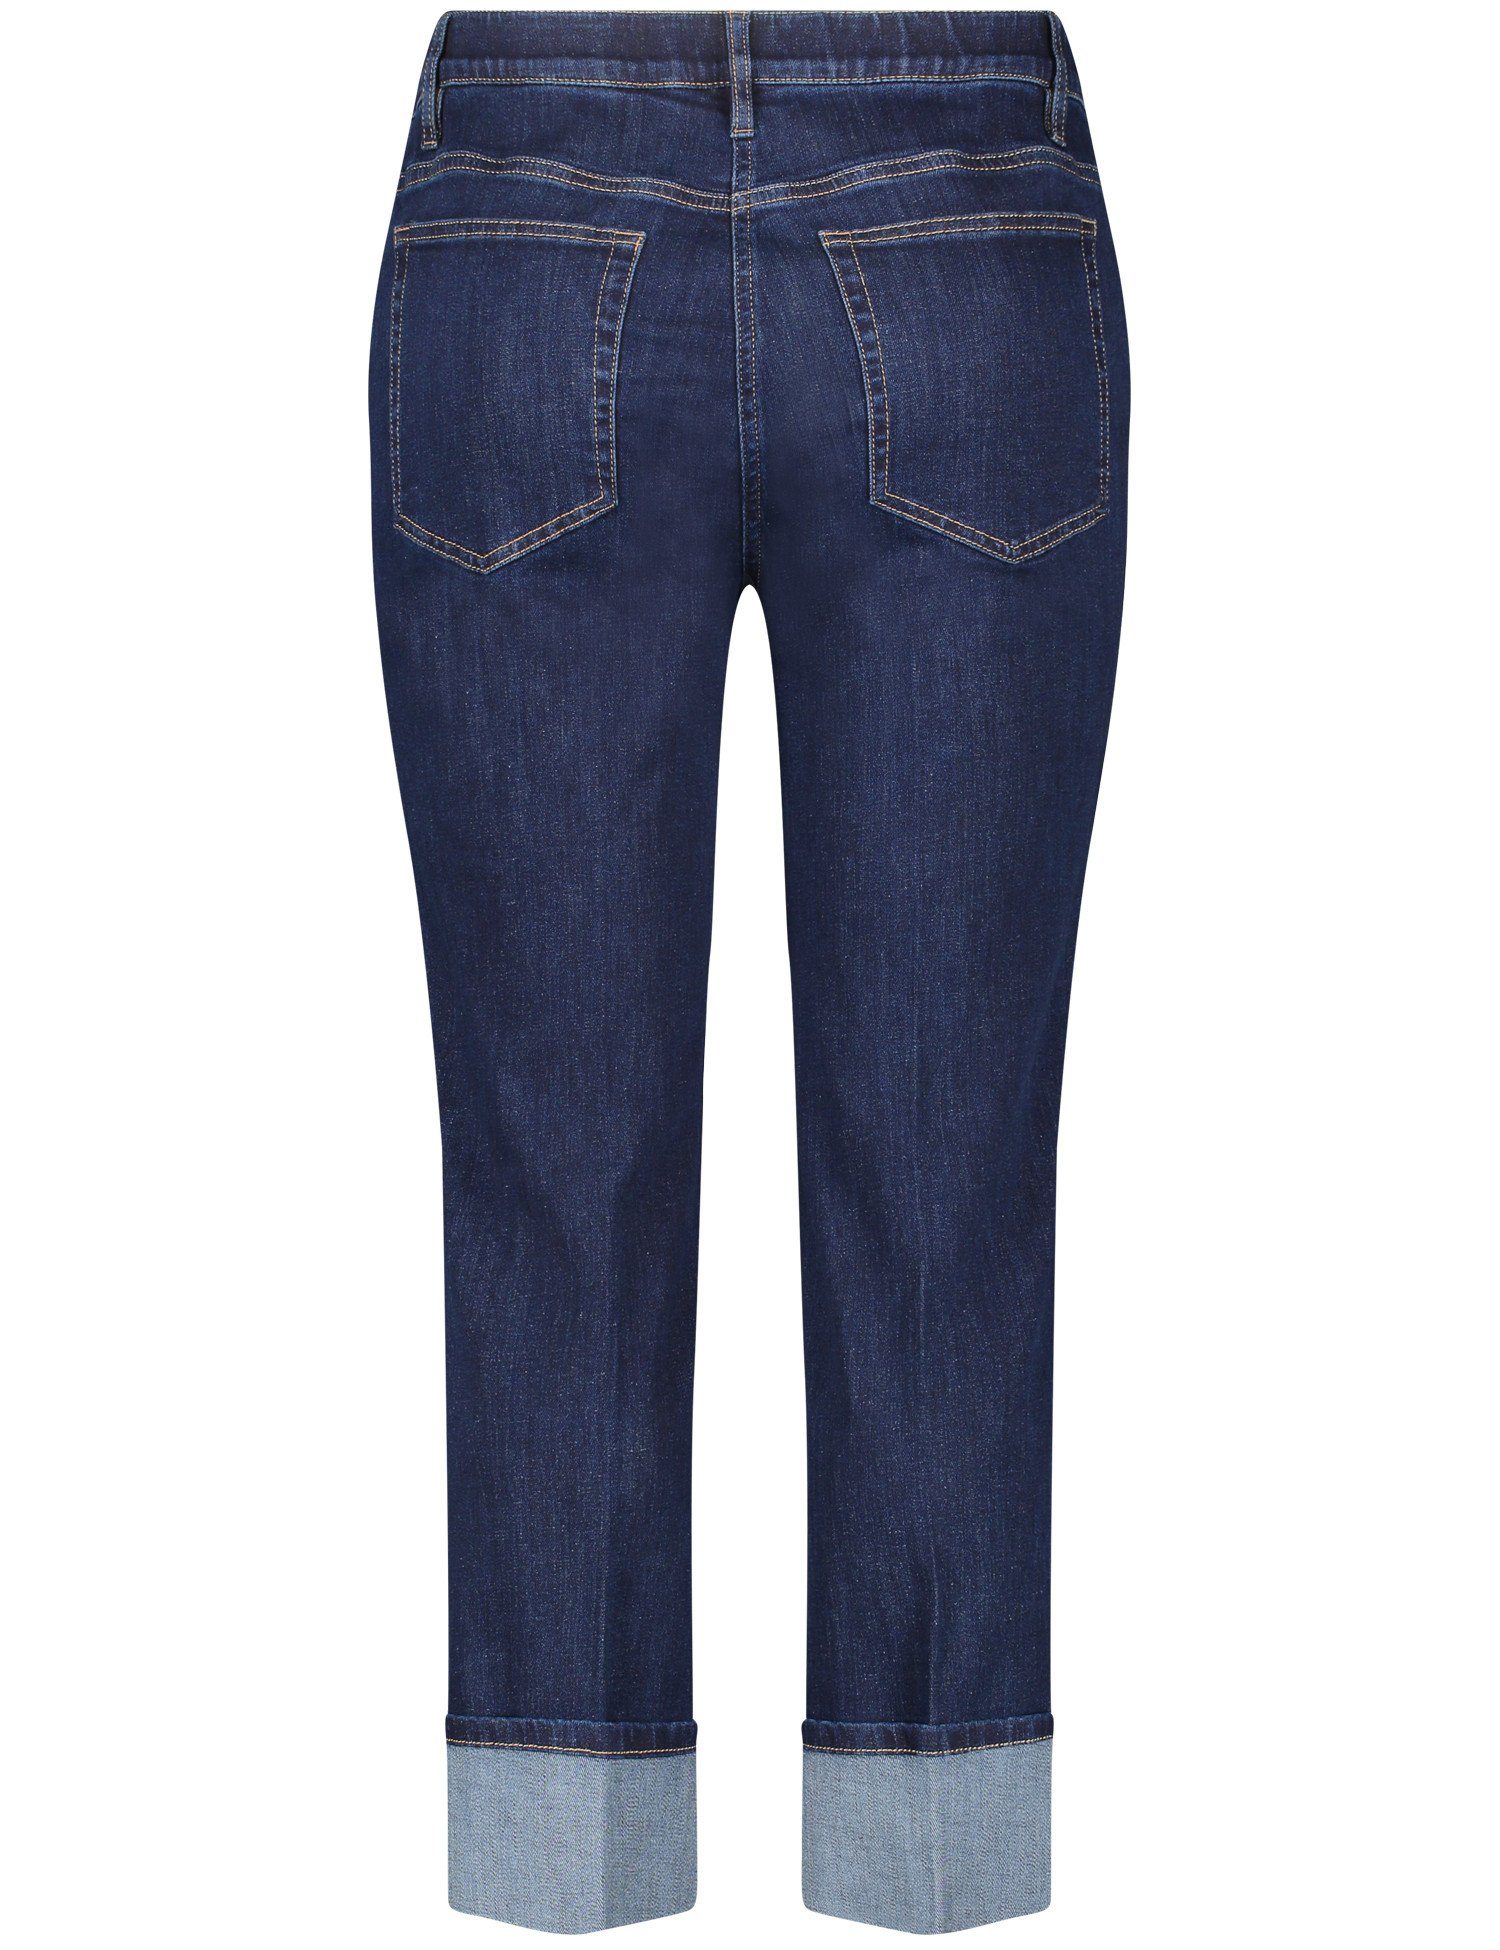 Samoon in Turn-up-Jeans Stretch-Jeans Länge 7/8